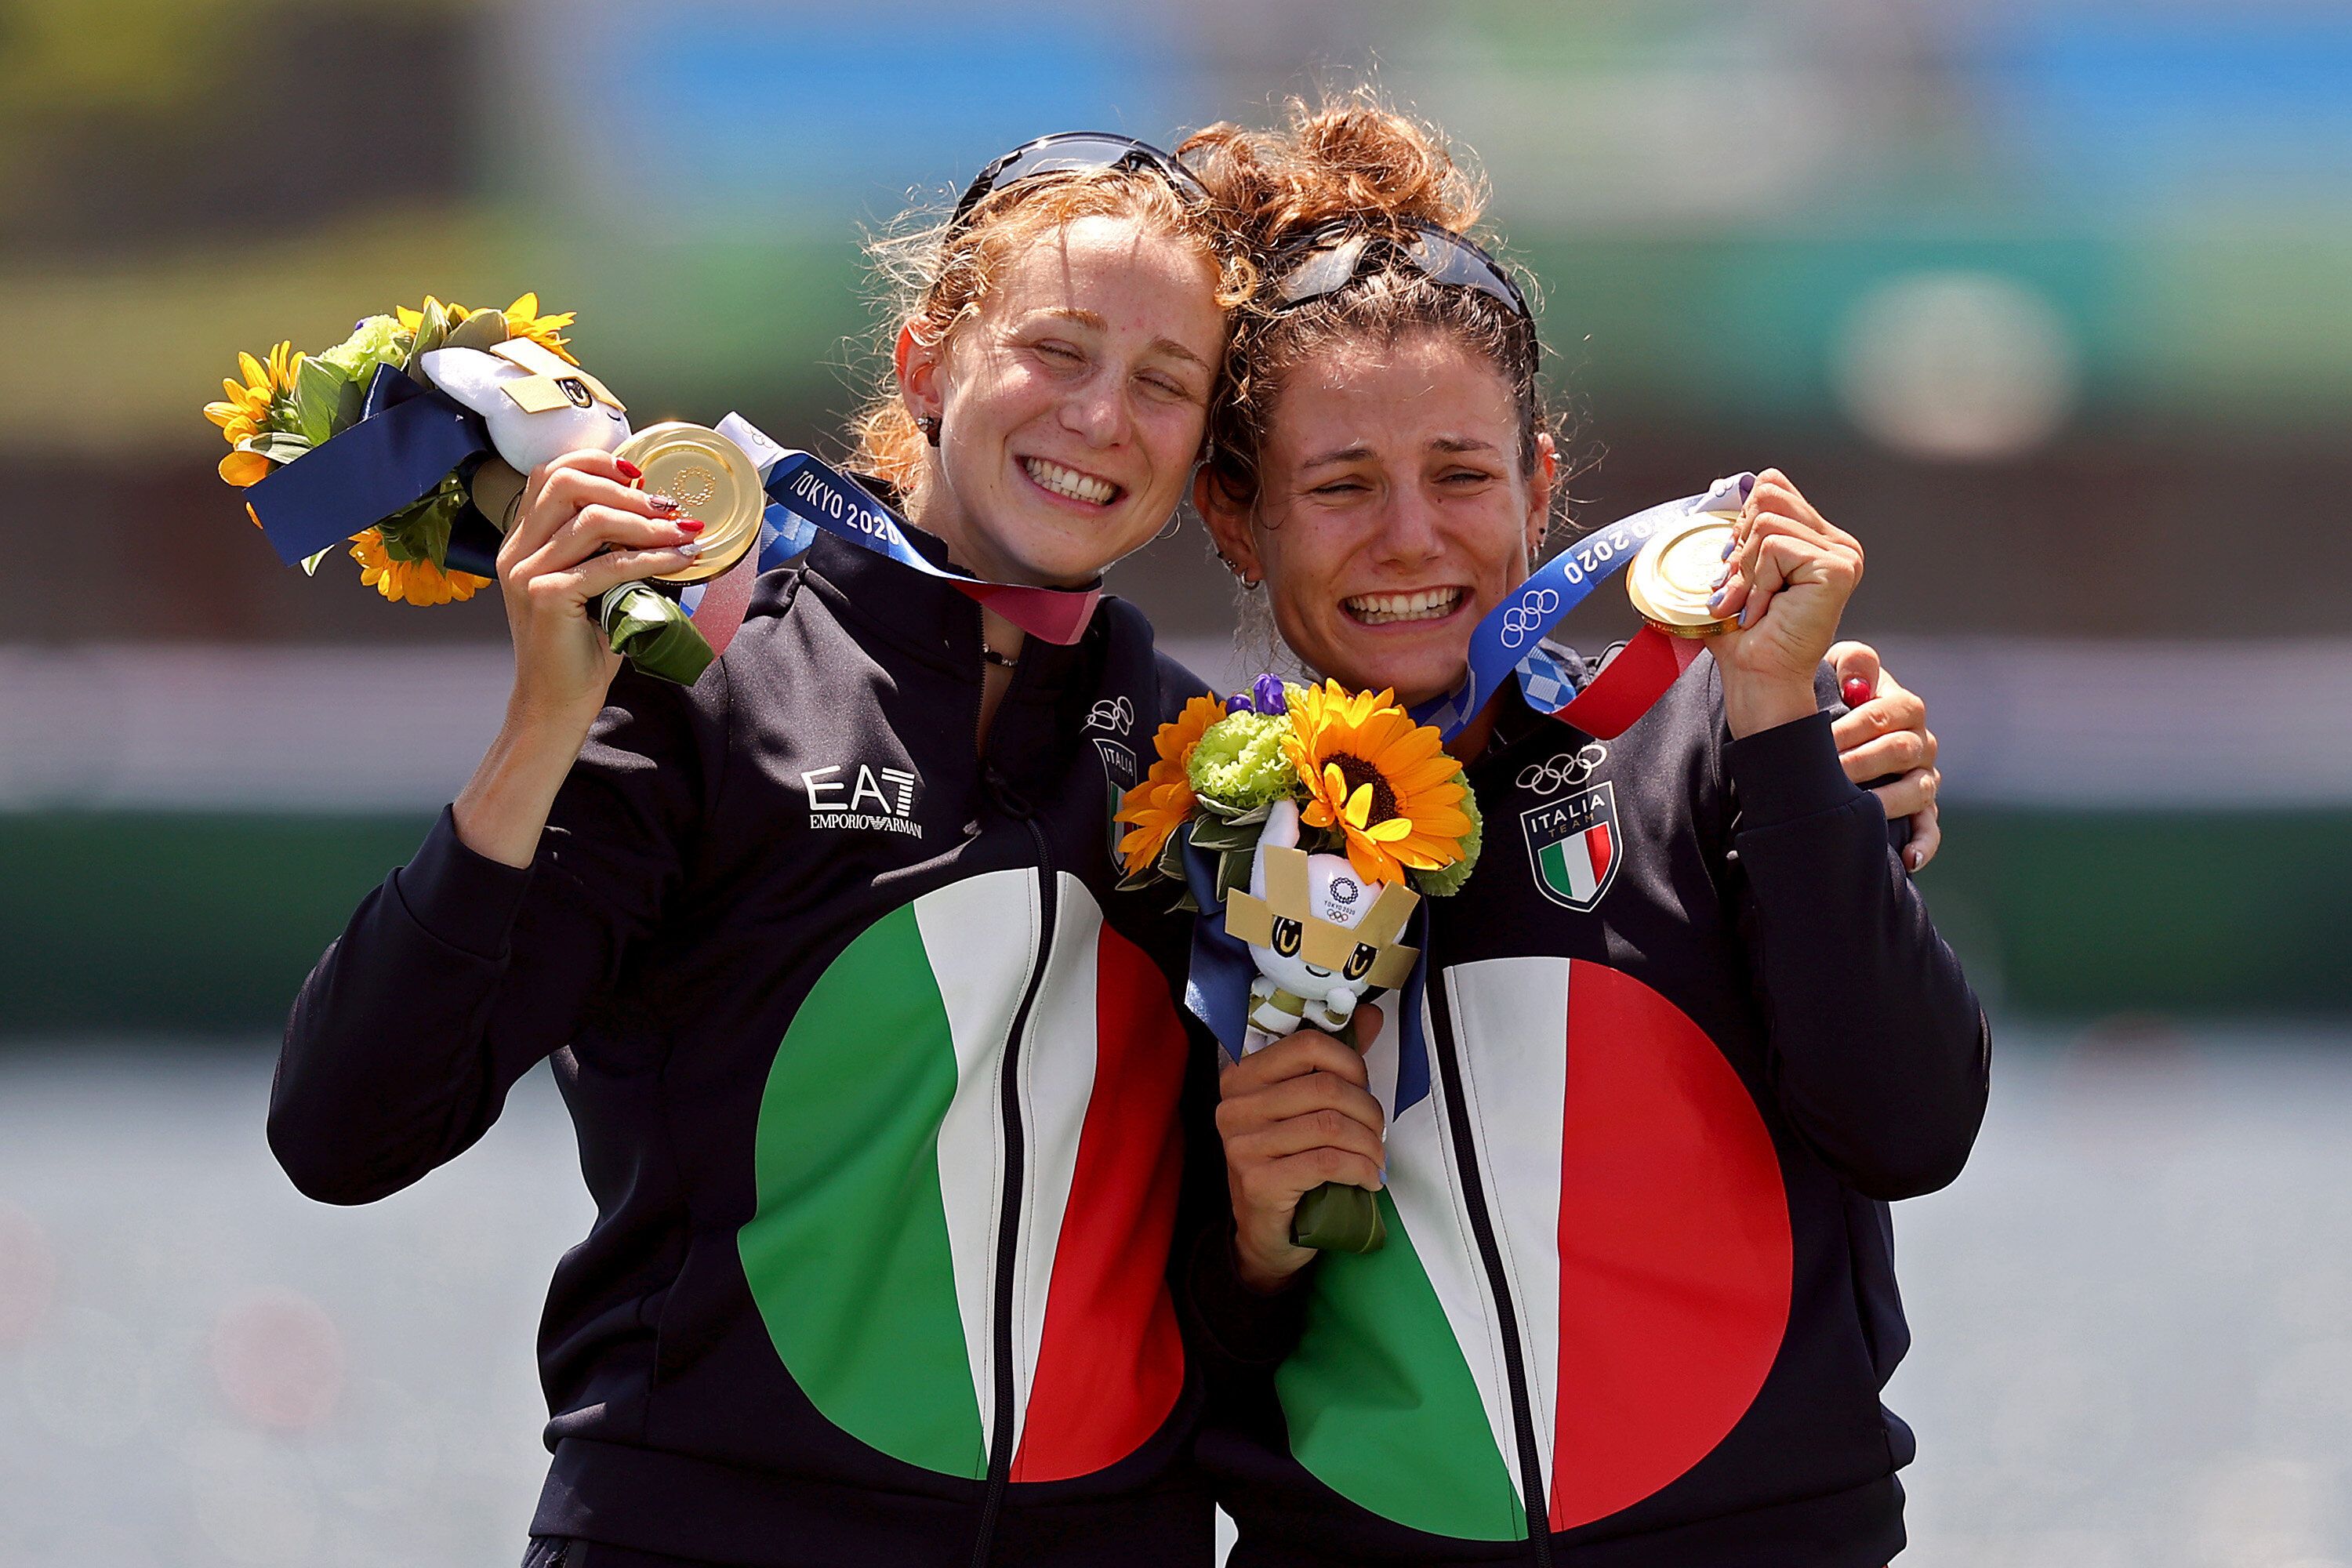 Italian gold medalists Valentina Rodini and Federica Cesarini with the bouquets following their victory in the women's lightw